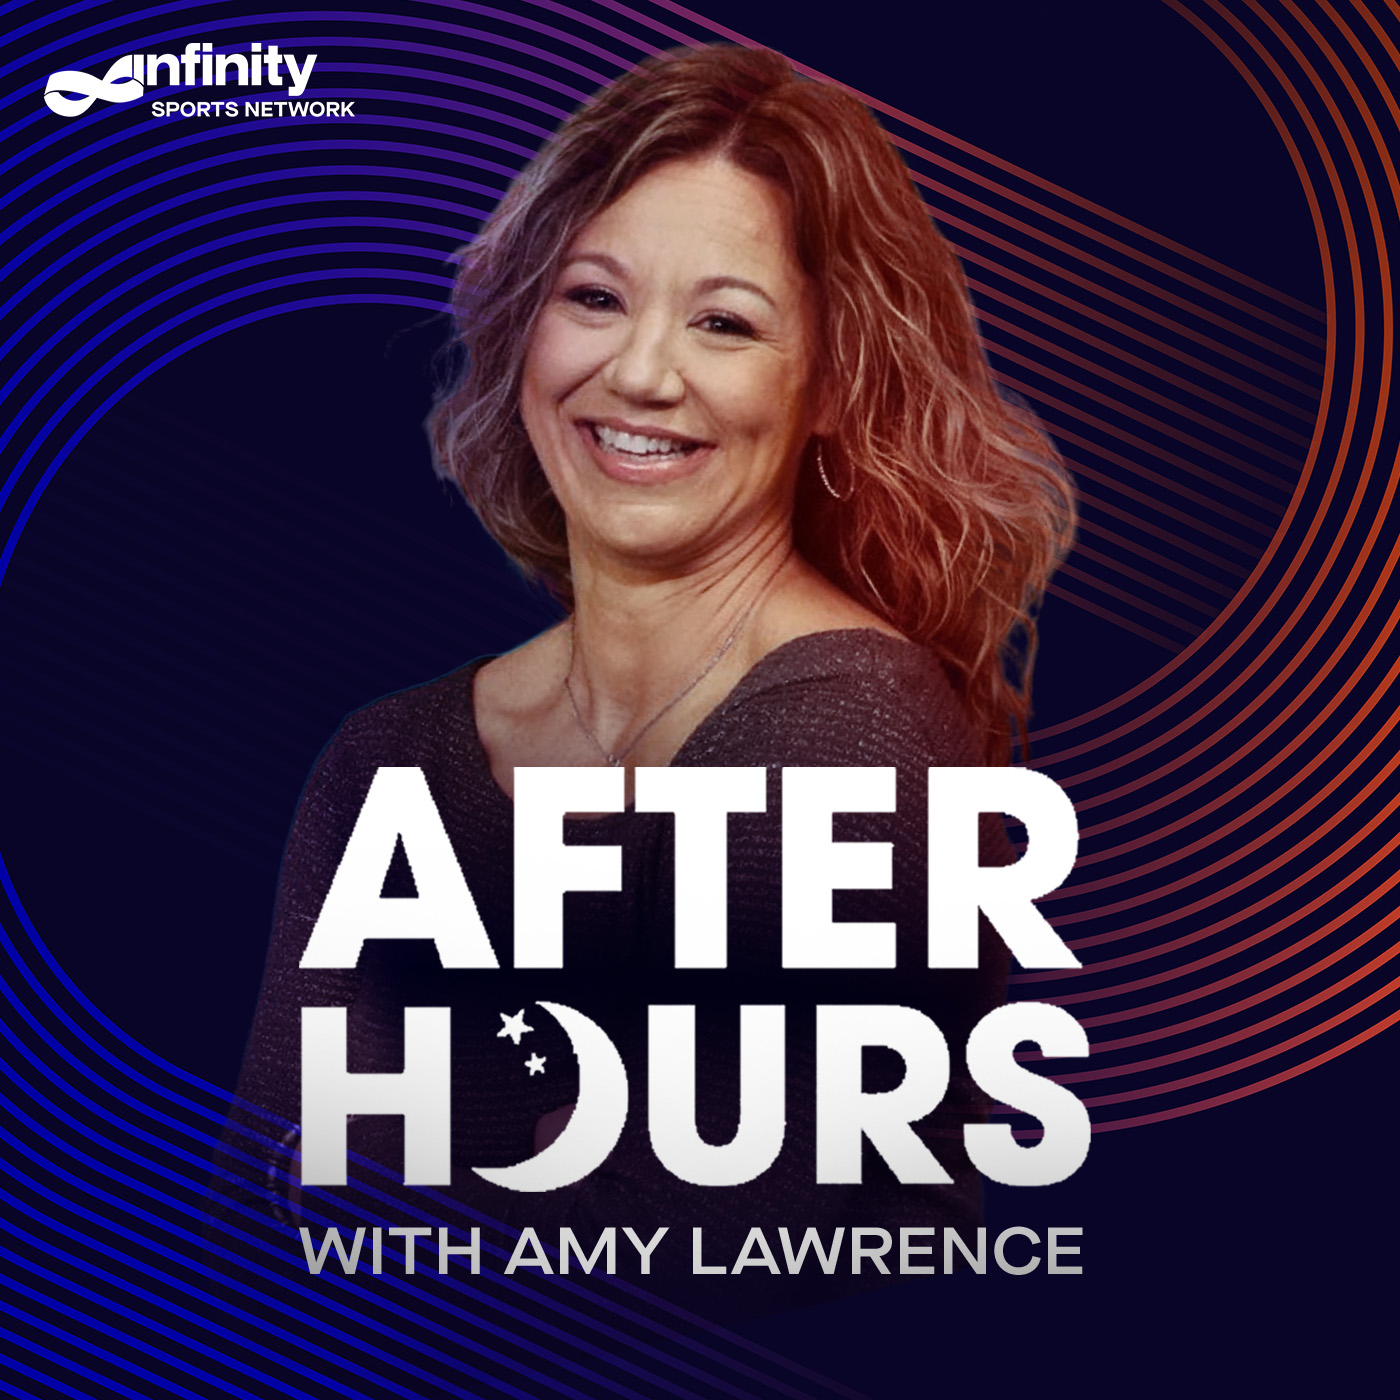 4-12-22 After Hours with Amy Lawrence PODCAST: Hour 4